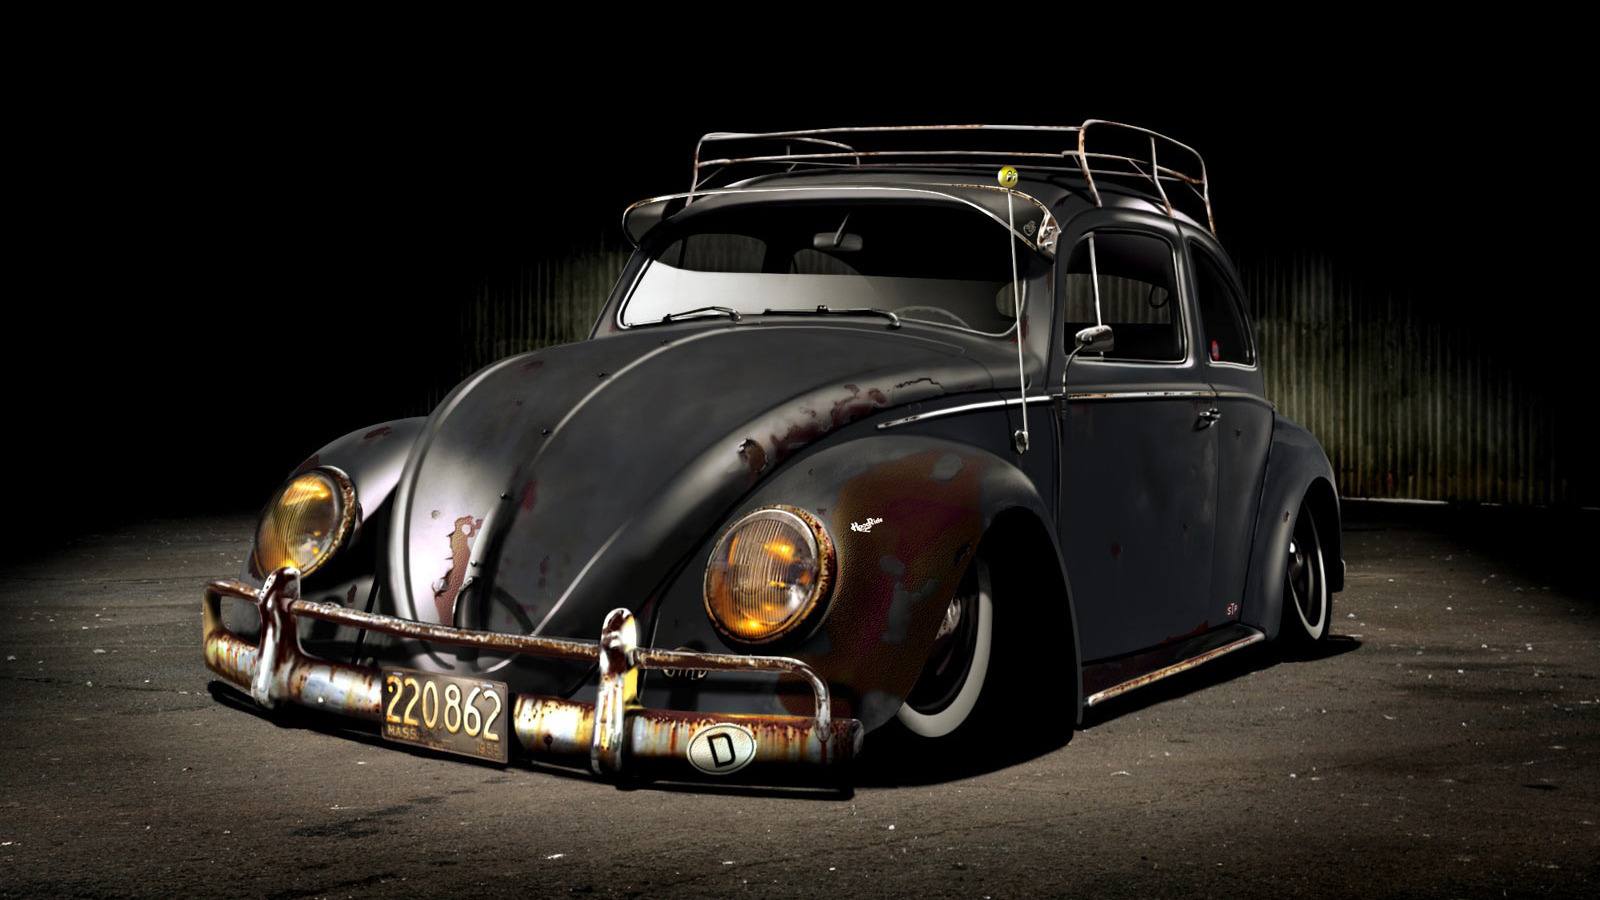  Wallpapers  Desktop on Old Cars Bug Vehicles Rat Rod Car Beatle Hd Wallpaper   Insects   Bugs